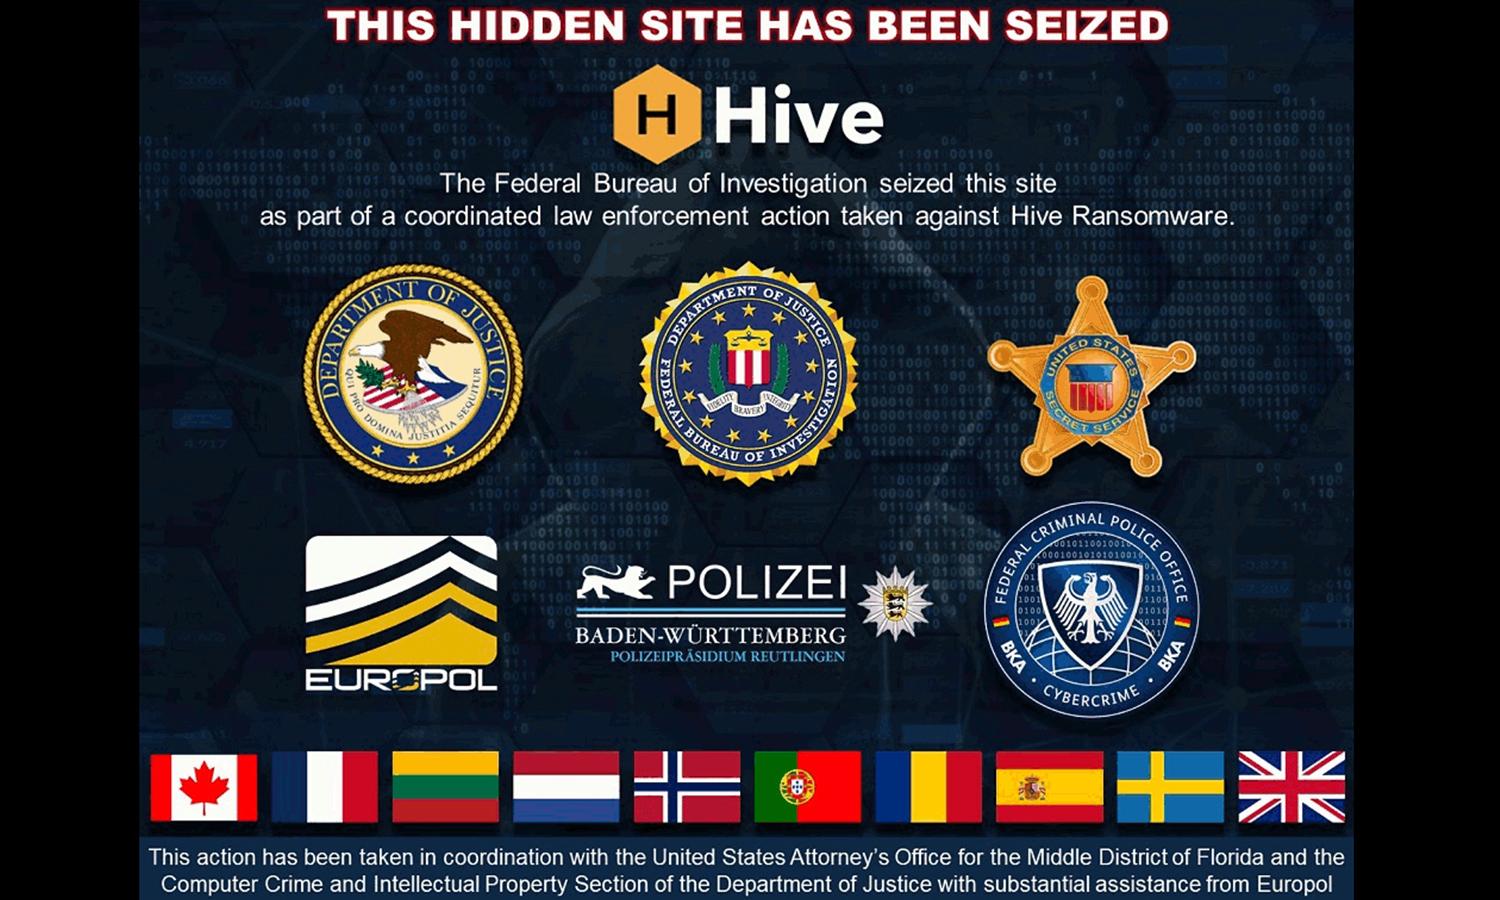 A screen image says the Hive's site has been seized by law enforcement